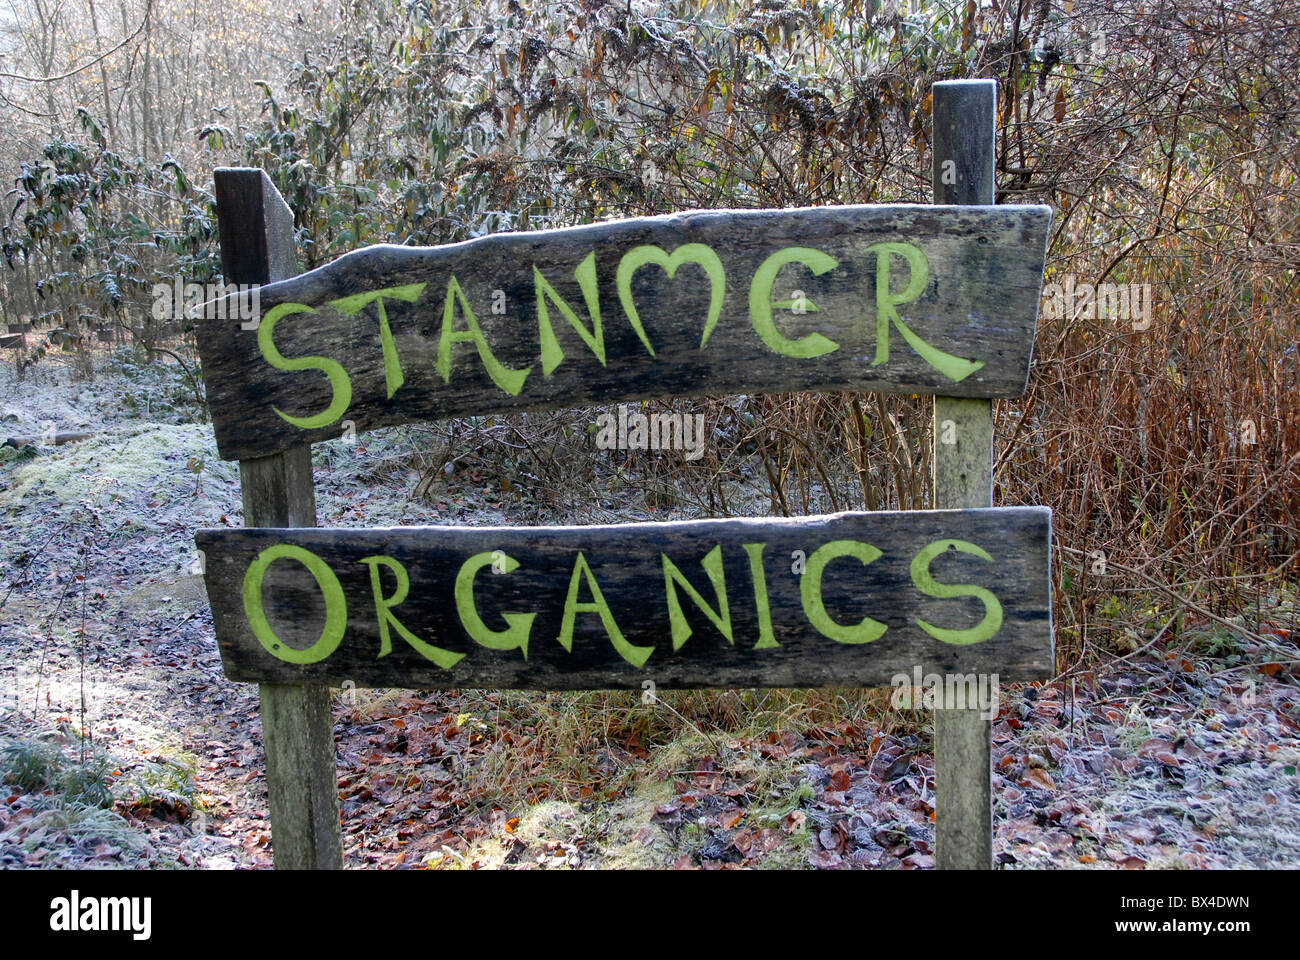 Stanmer Organics projet communautaire, Stanmer Park, Brighton, UK Banque D'Images